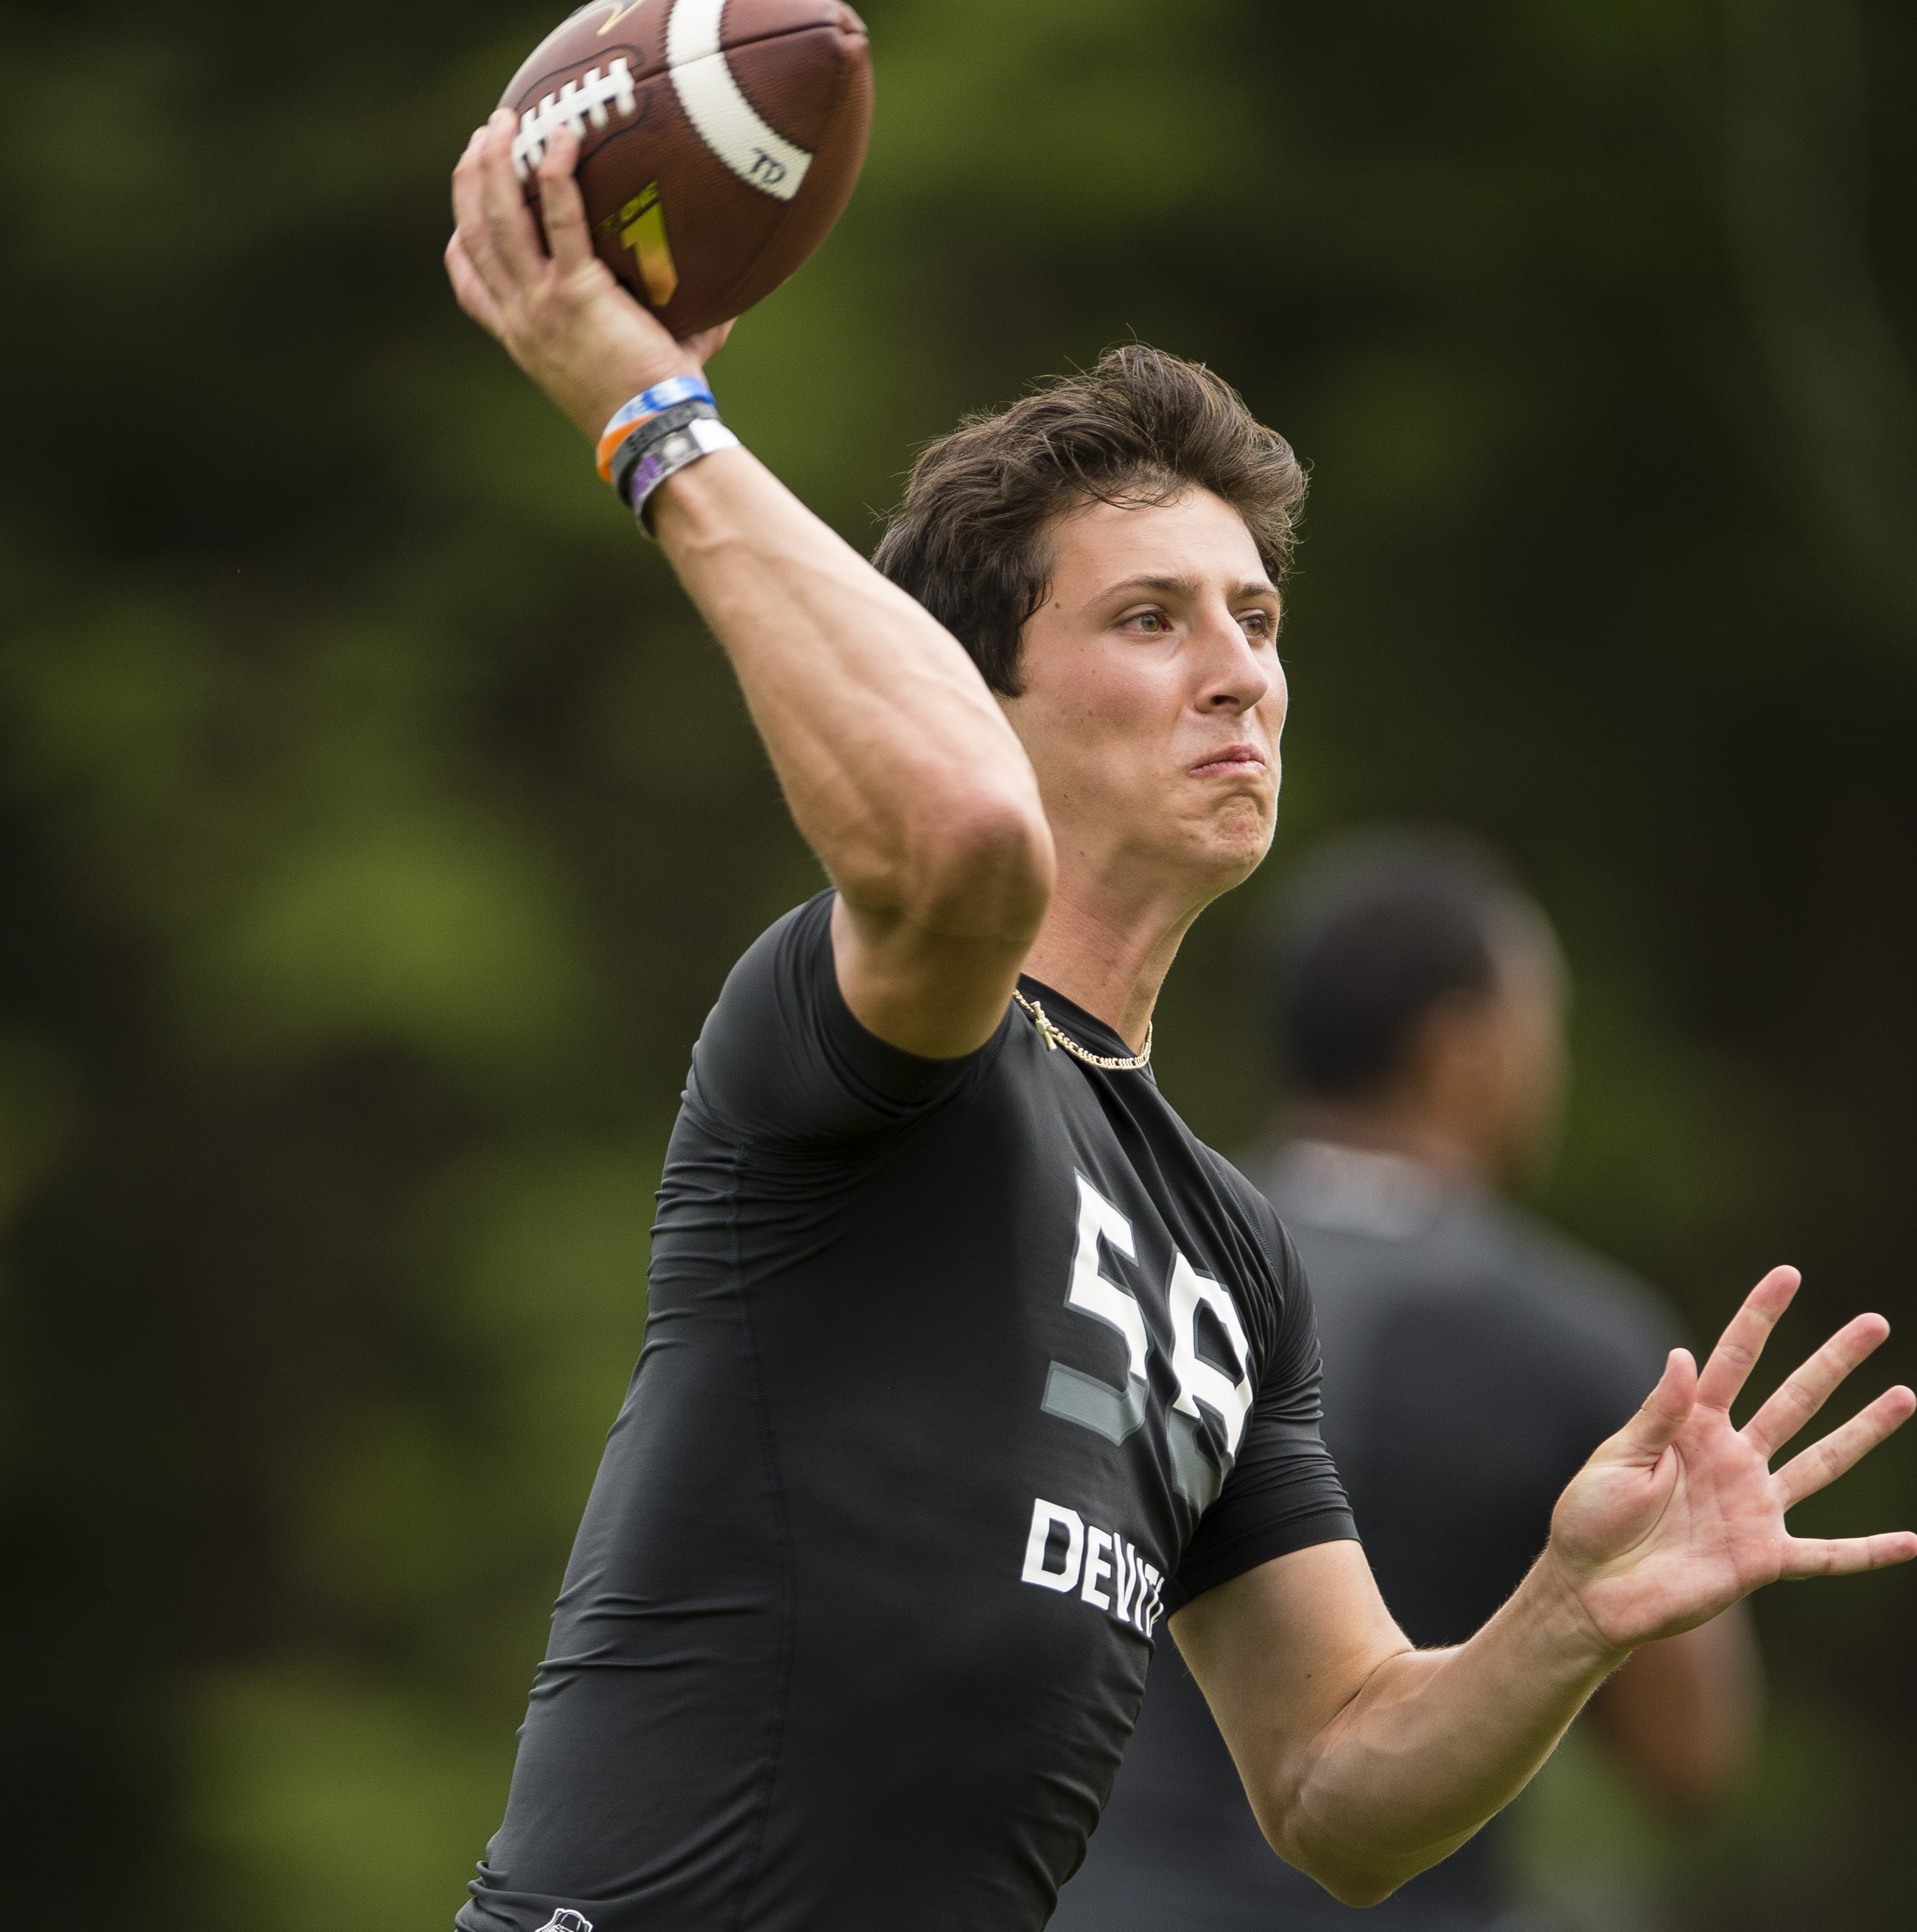 July 8, 2016 -- Beaverton, OR, U.S.A -- Quarterback Tommy DeVito of Don Bosco Prep (New Jersey) throws a pass at The Opening and Elite 11 high school football camp held at Nike headquarters in Oregon. -- Photo by Troy Wayrynen-USA TODAY Sports Images, Gannett ORG XMIT: US 135130 opening/ elite 1 7/6/ [Via MerlinFTP Drop]